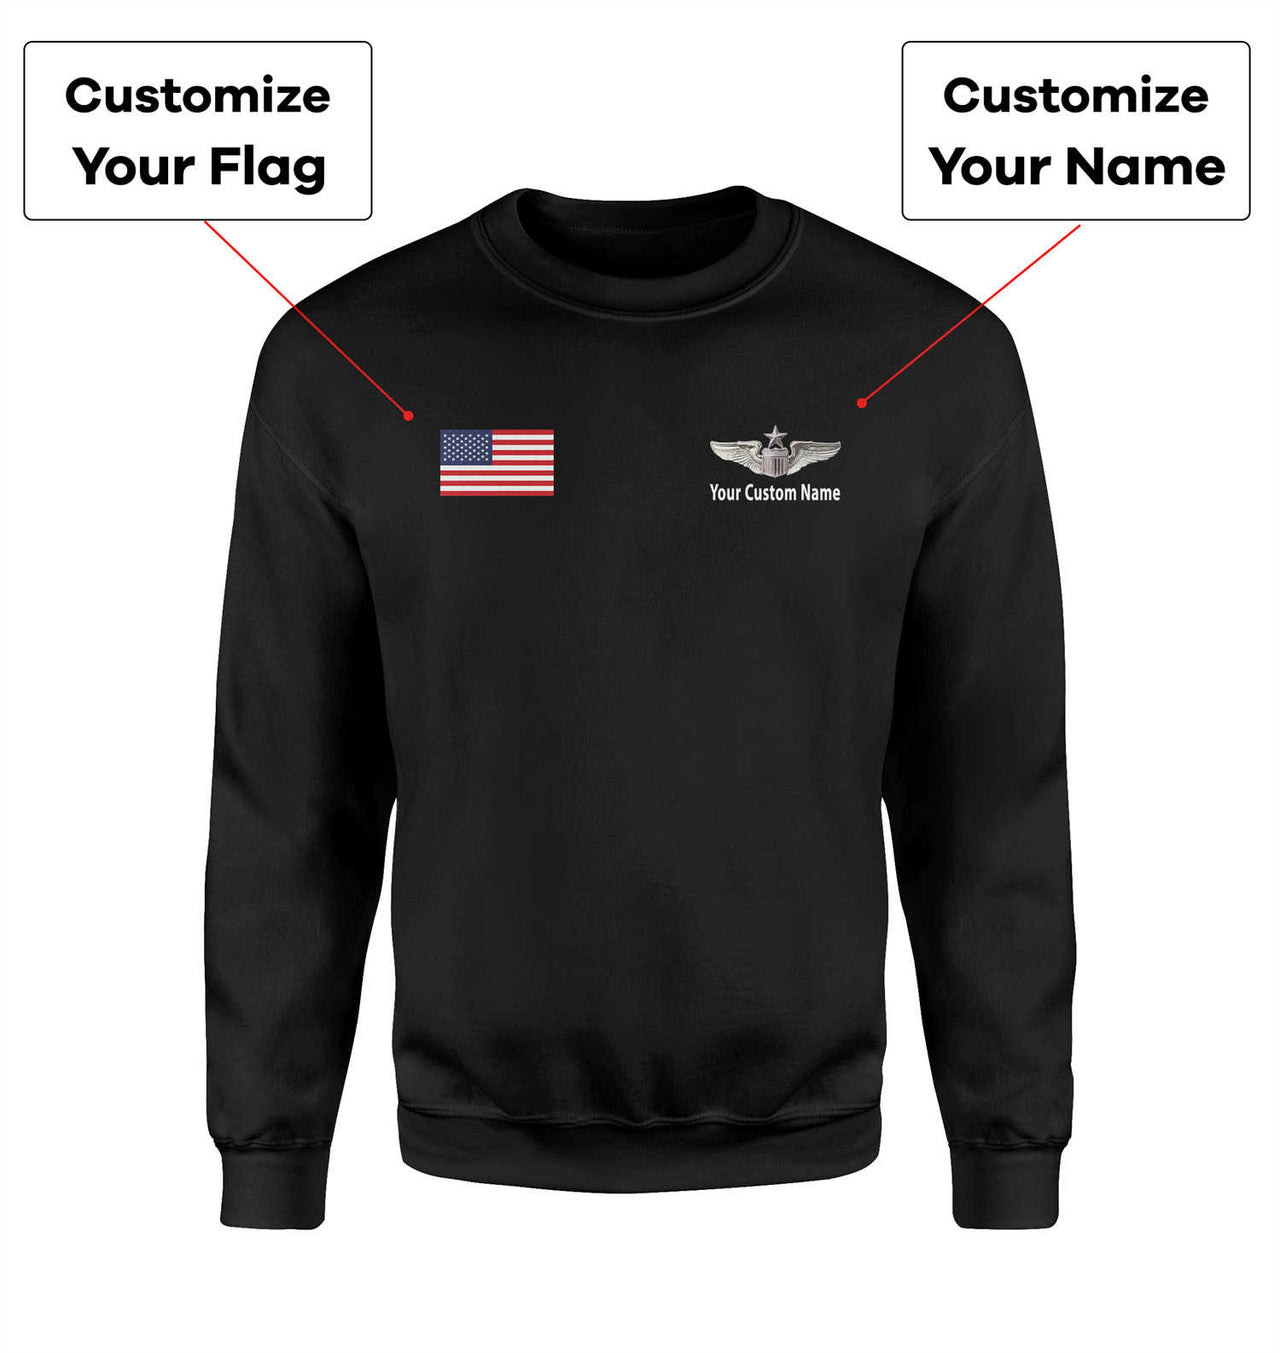 Custom Flag & Name with (US Air Force & Star) Designed 3D Sweatshirts